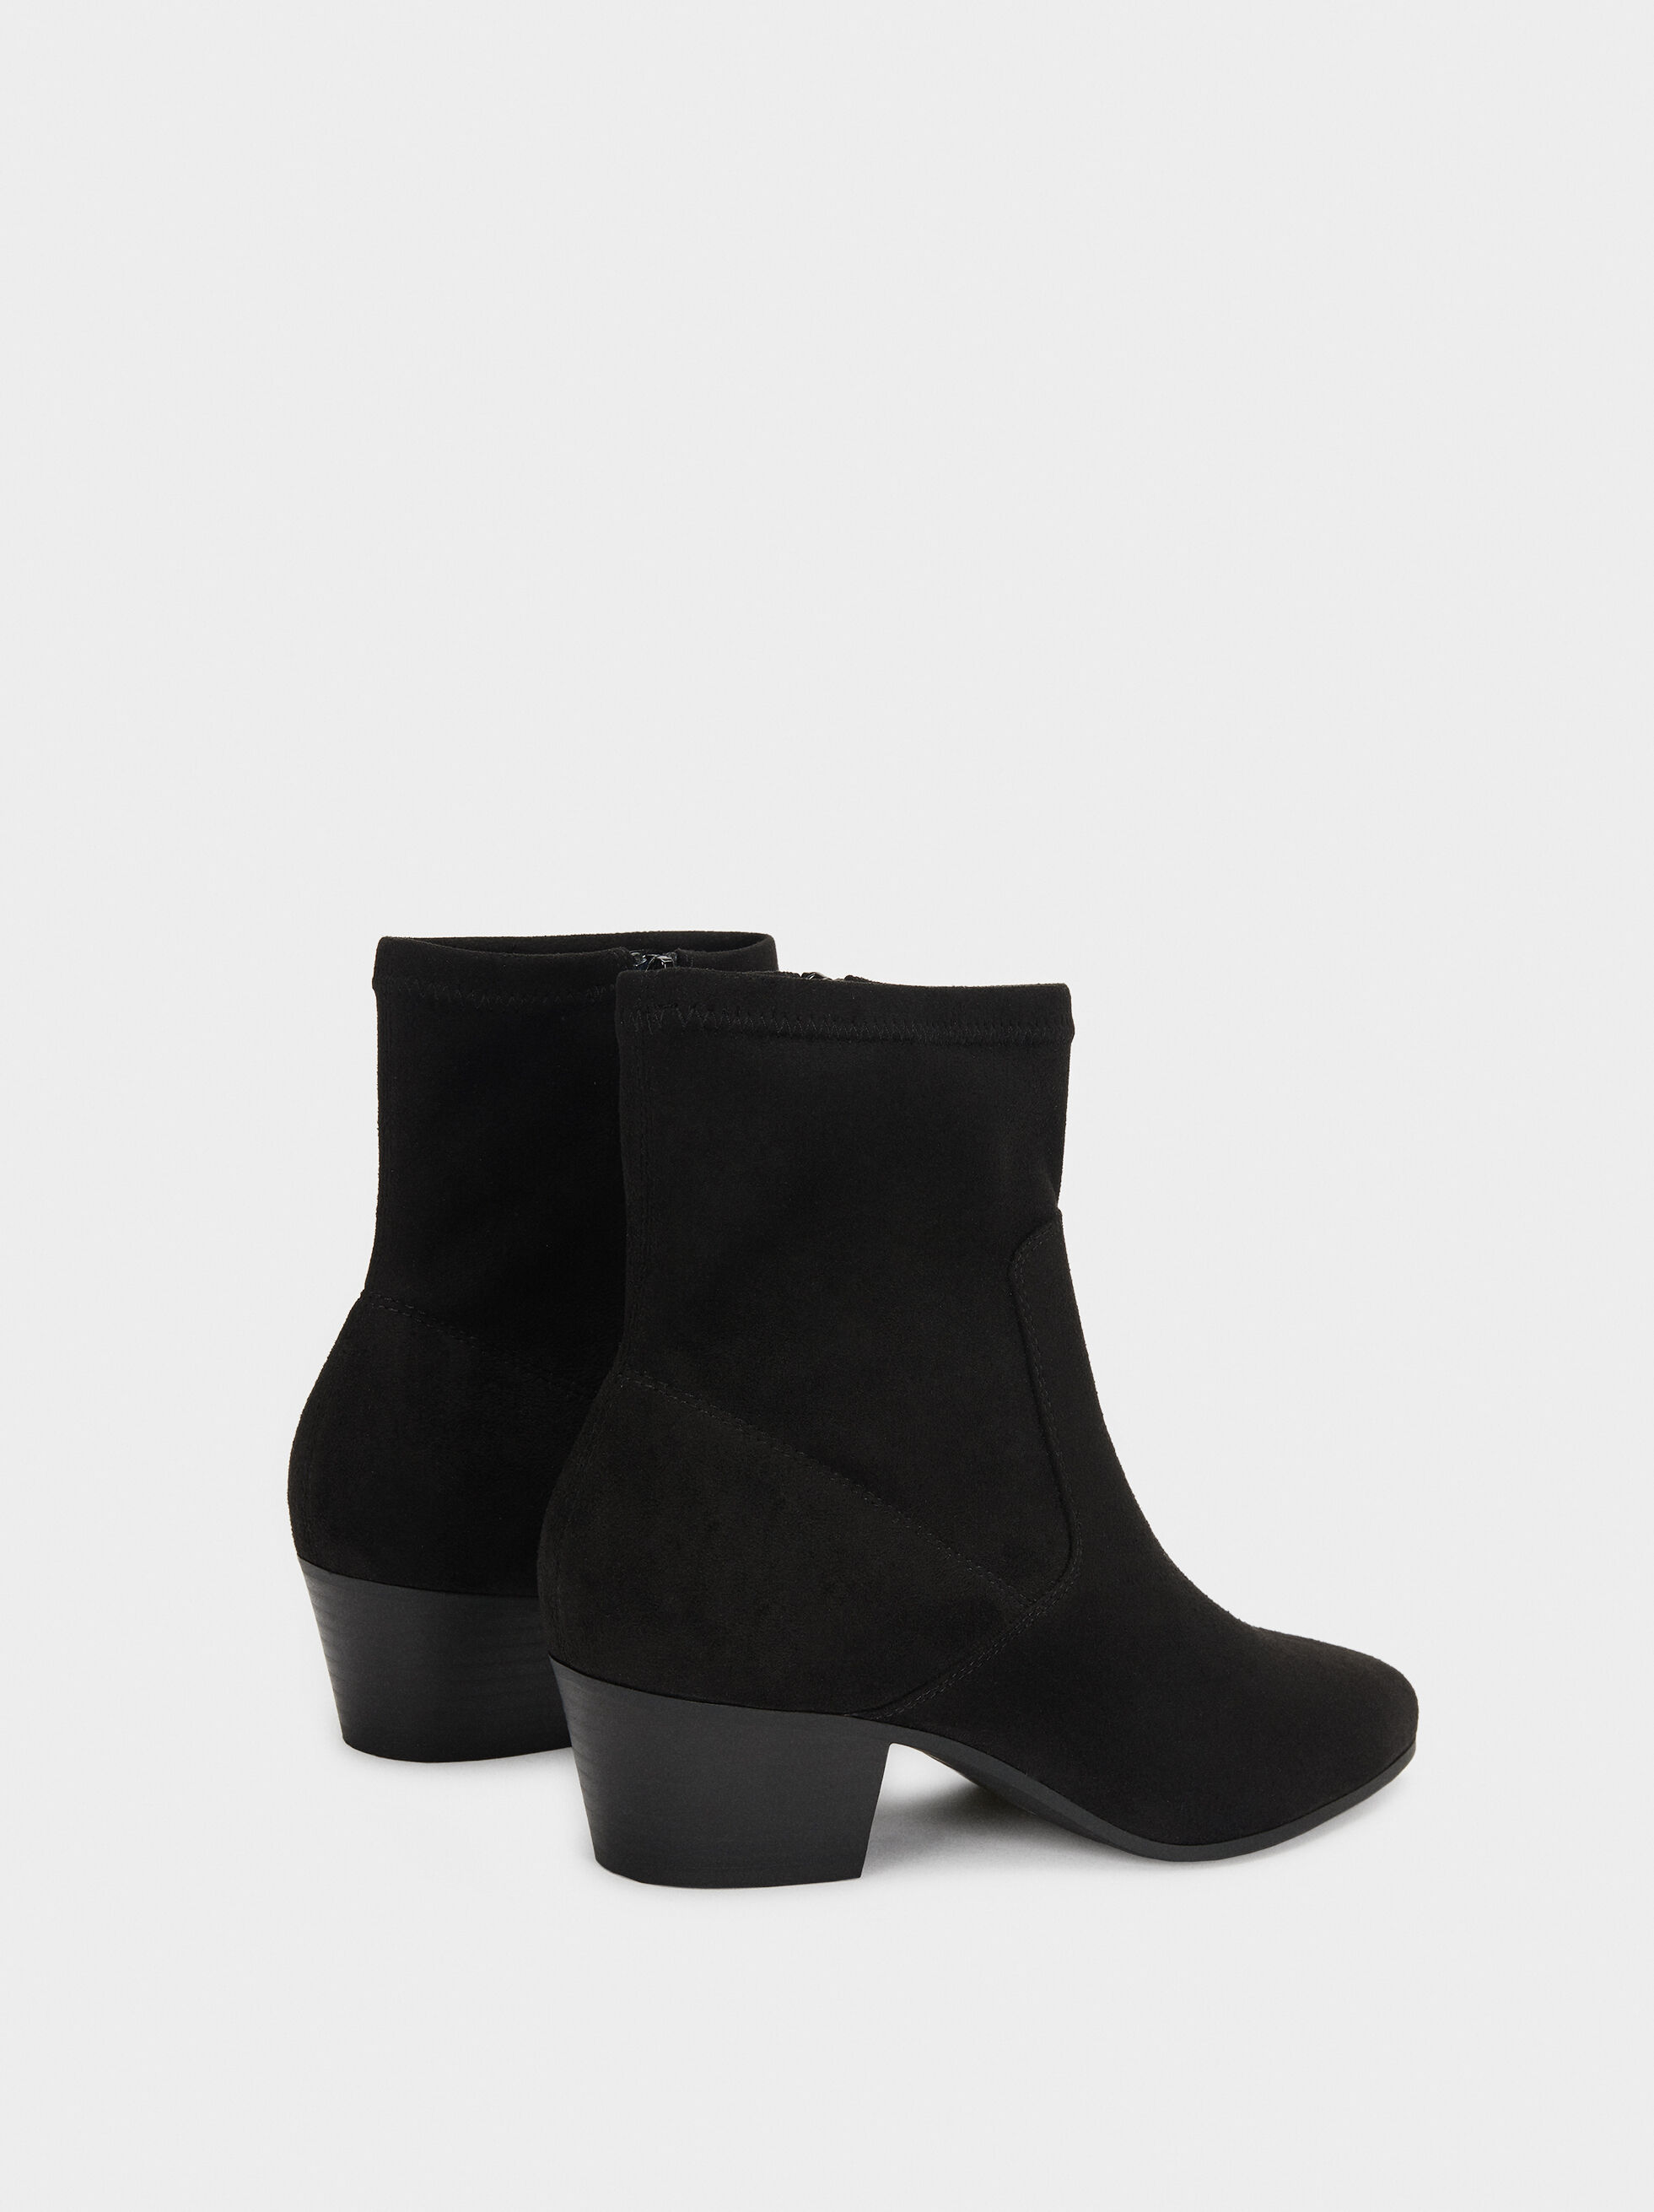 stretch black ankle boots